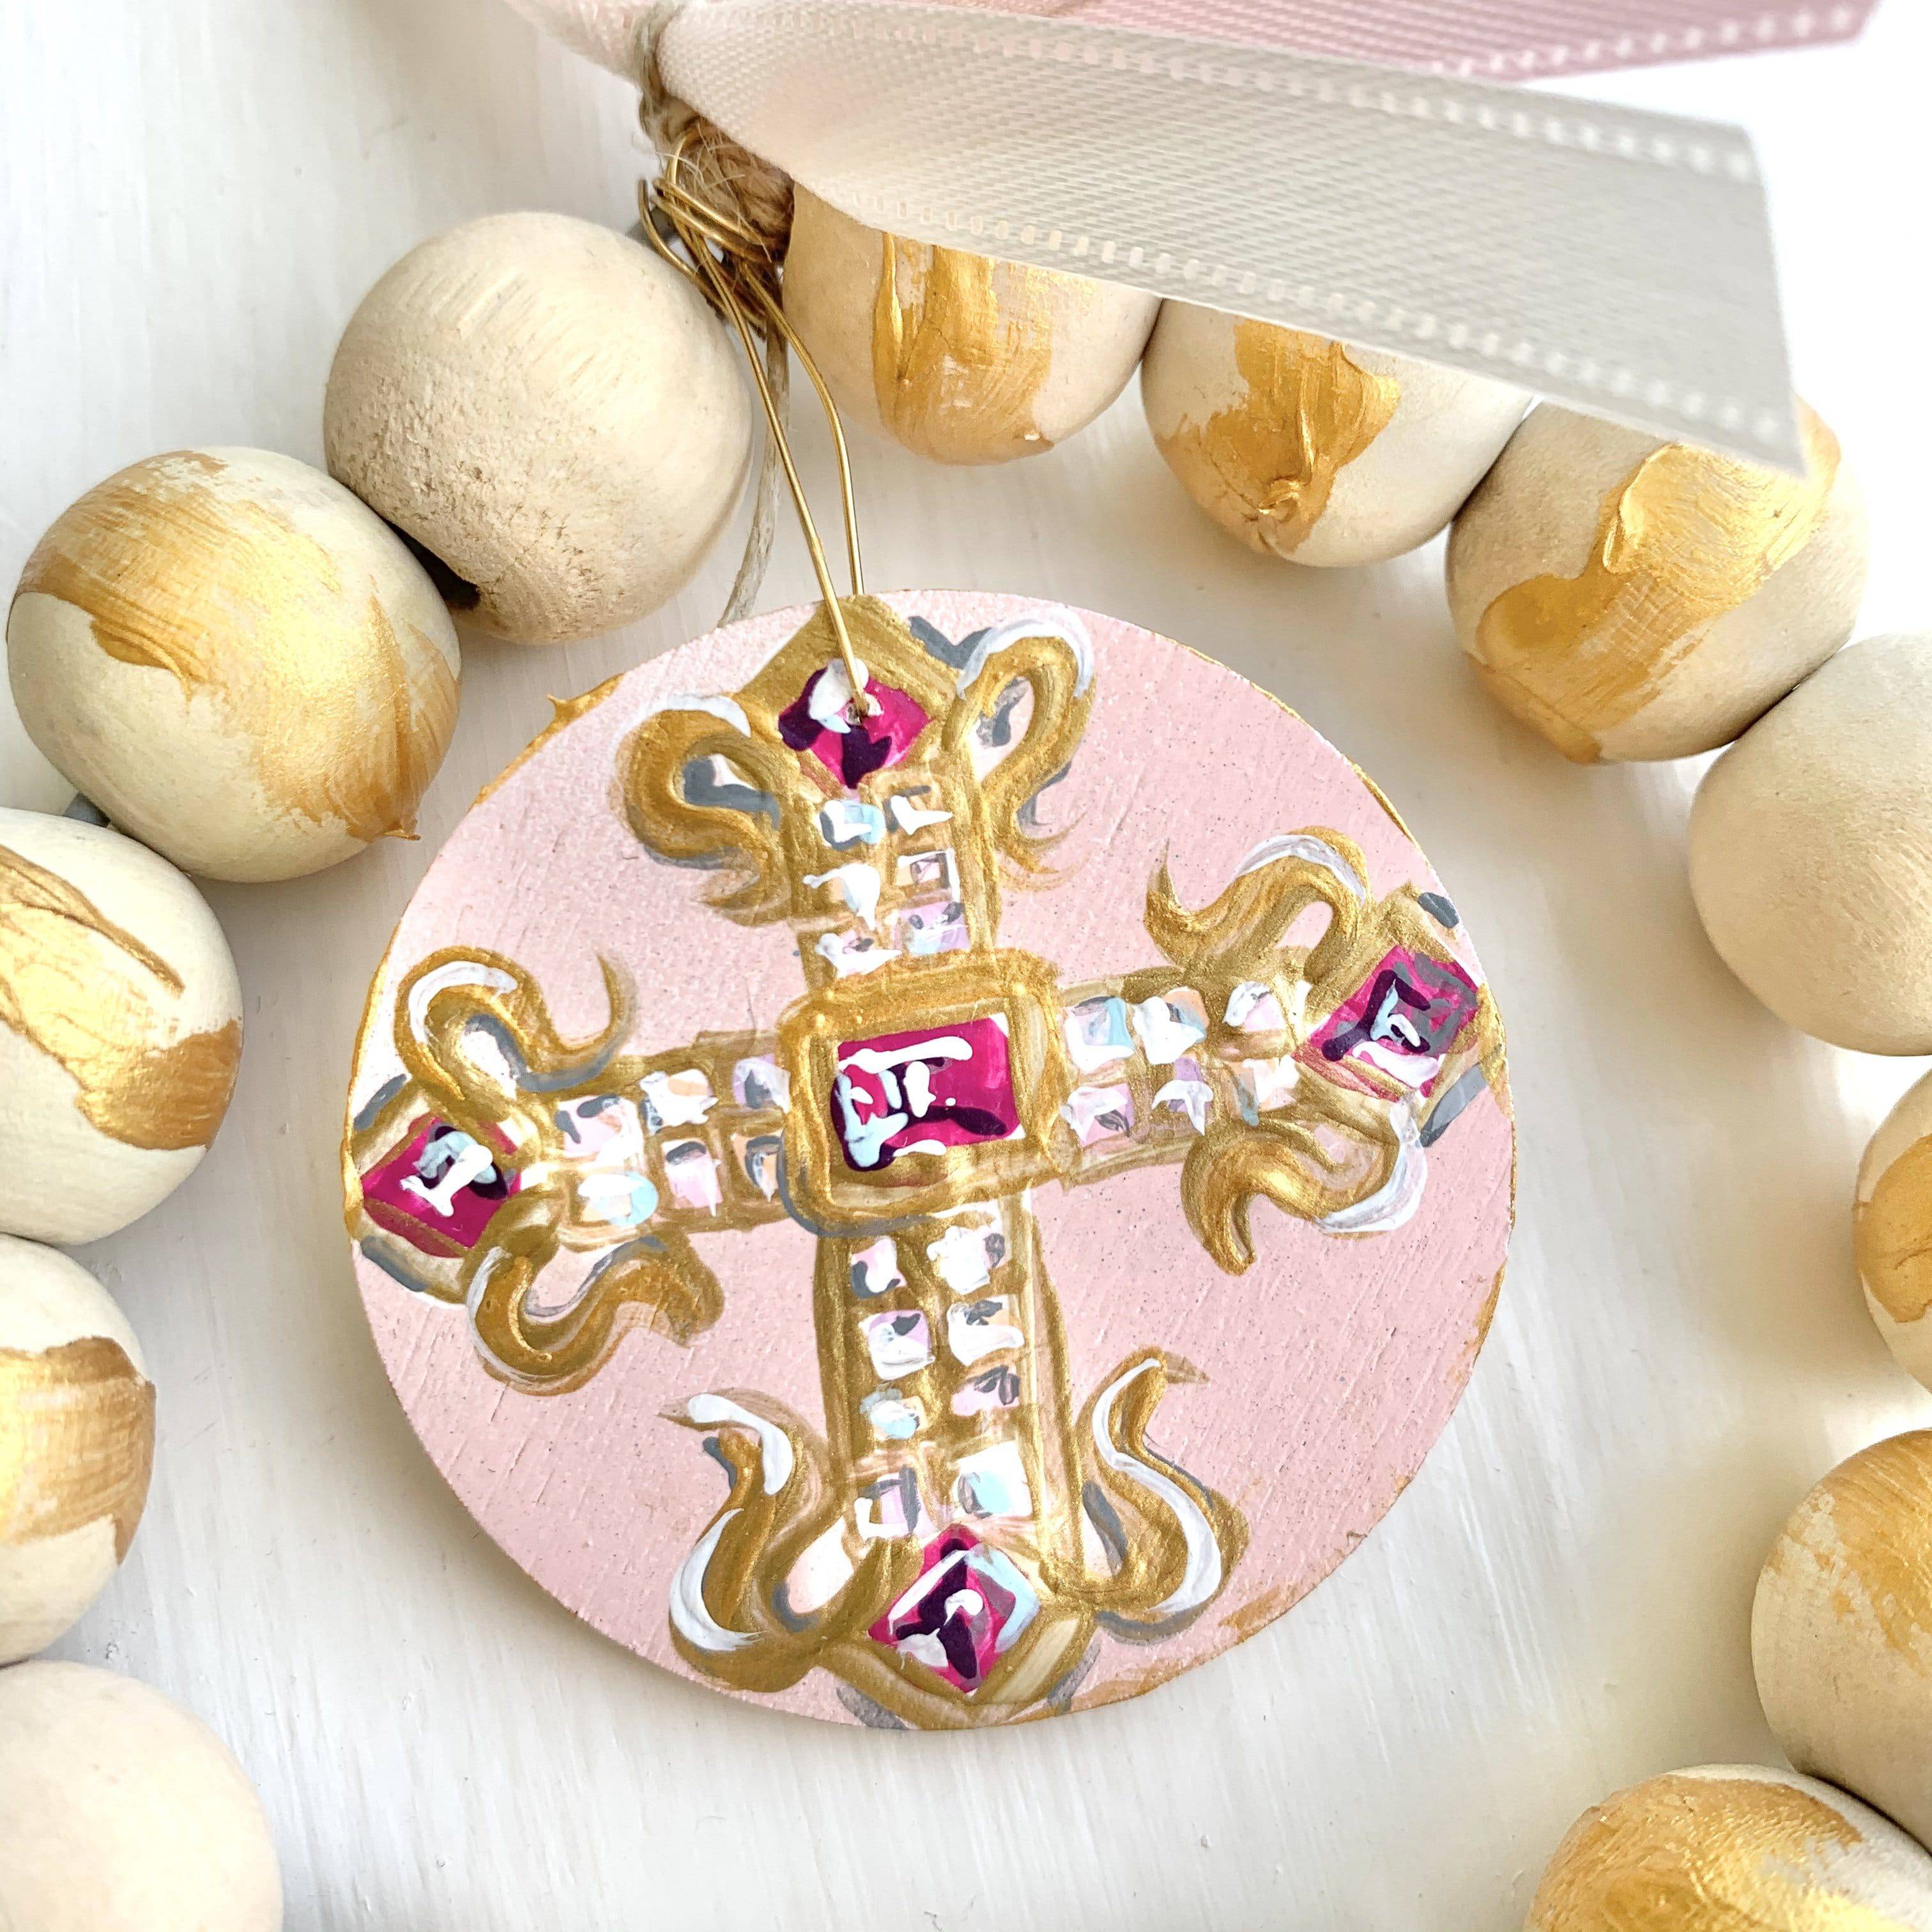 Toodle Lou Designs - Toodle Lou Designs Cross Wooden Bead Art - Little Miss Muffin Children & Home